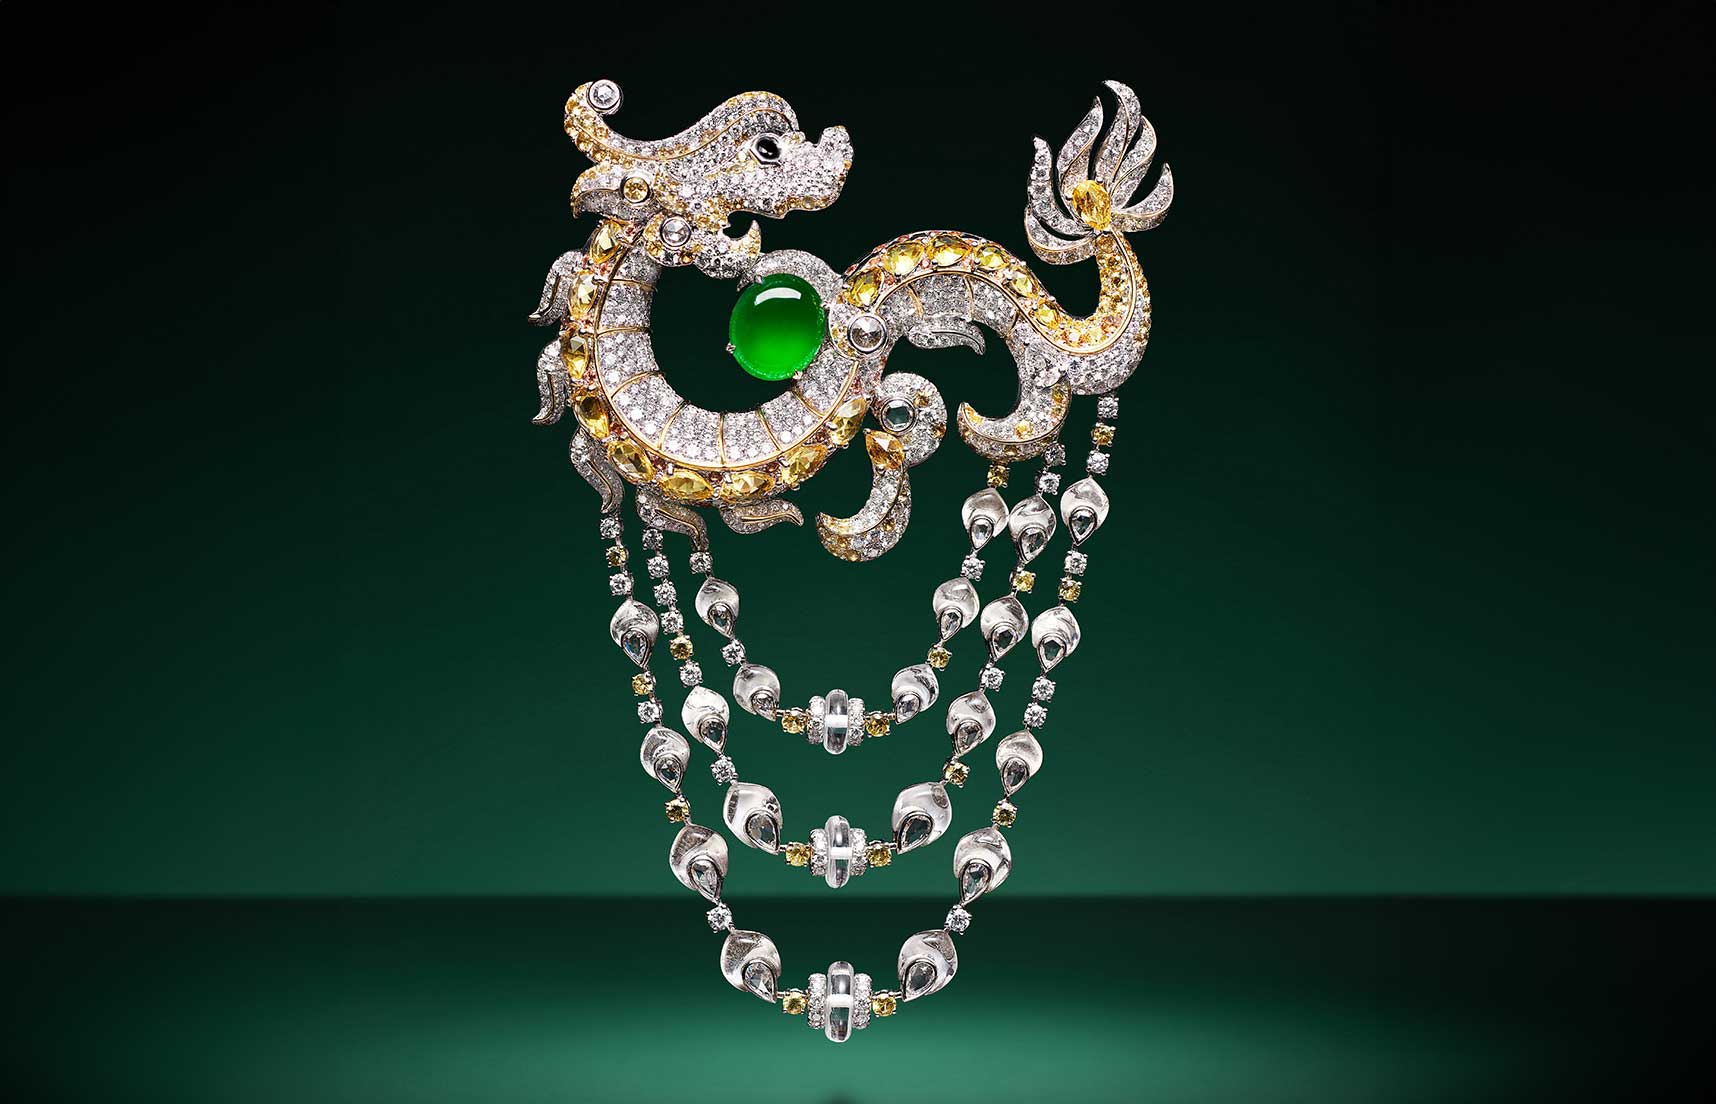 HEHE High Jewelry Dragon’s Bright Serenity Curled Grass brooch with diamonds, yellow sapphire, a green jadeite cabochon and rock crystal from the Ascending Dragon High Jewellery collection